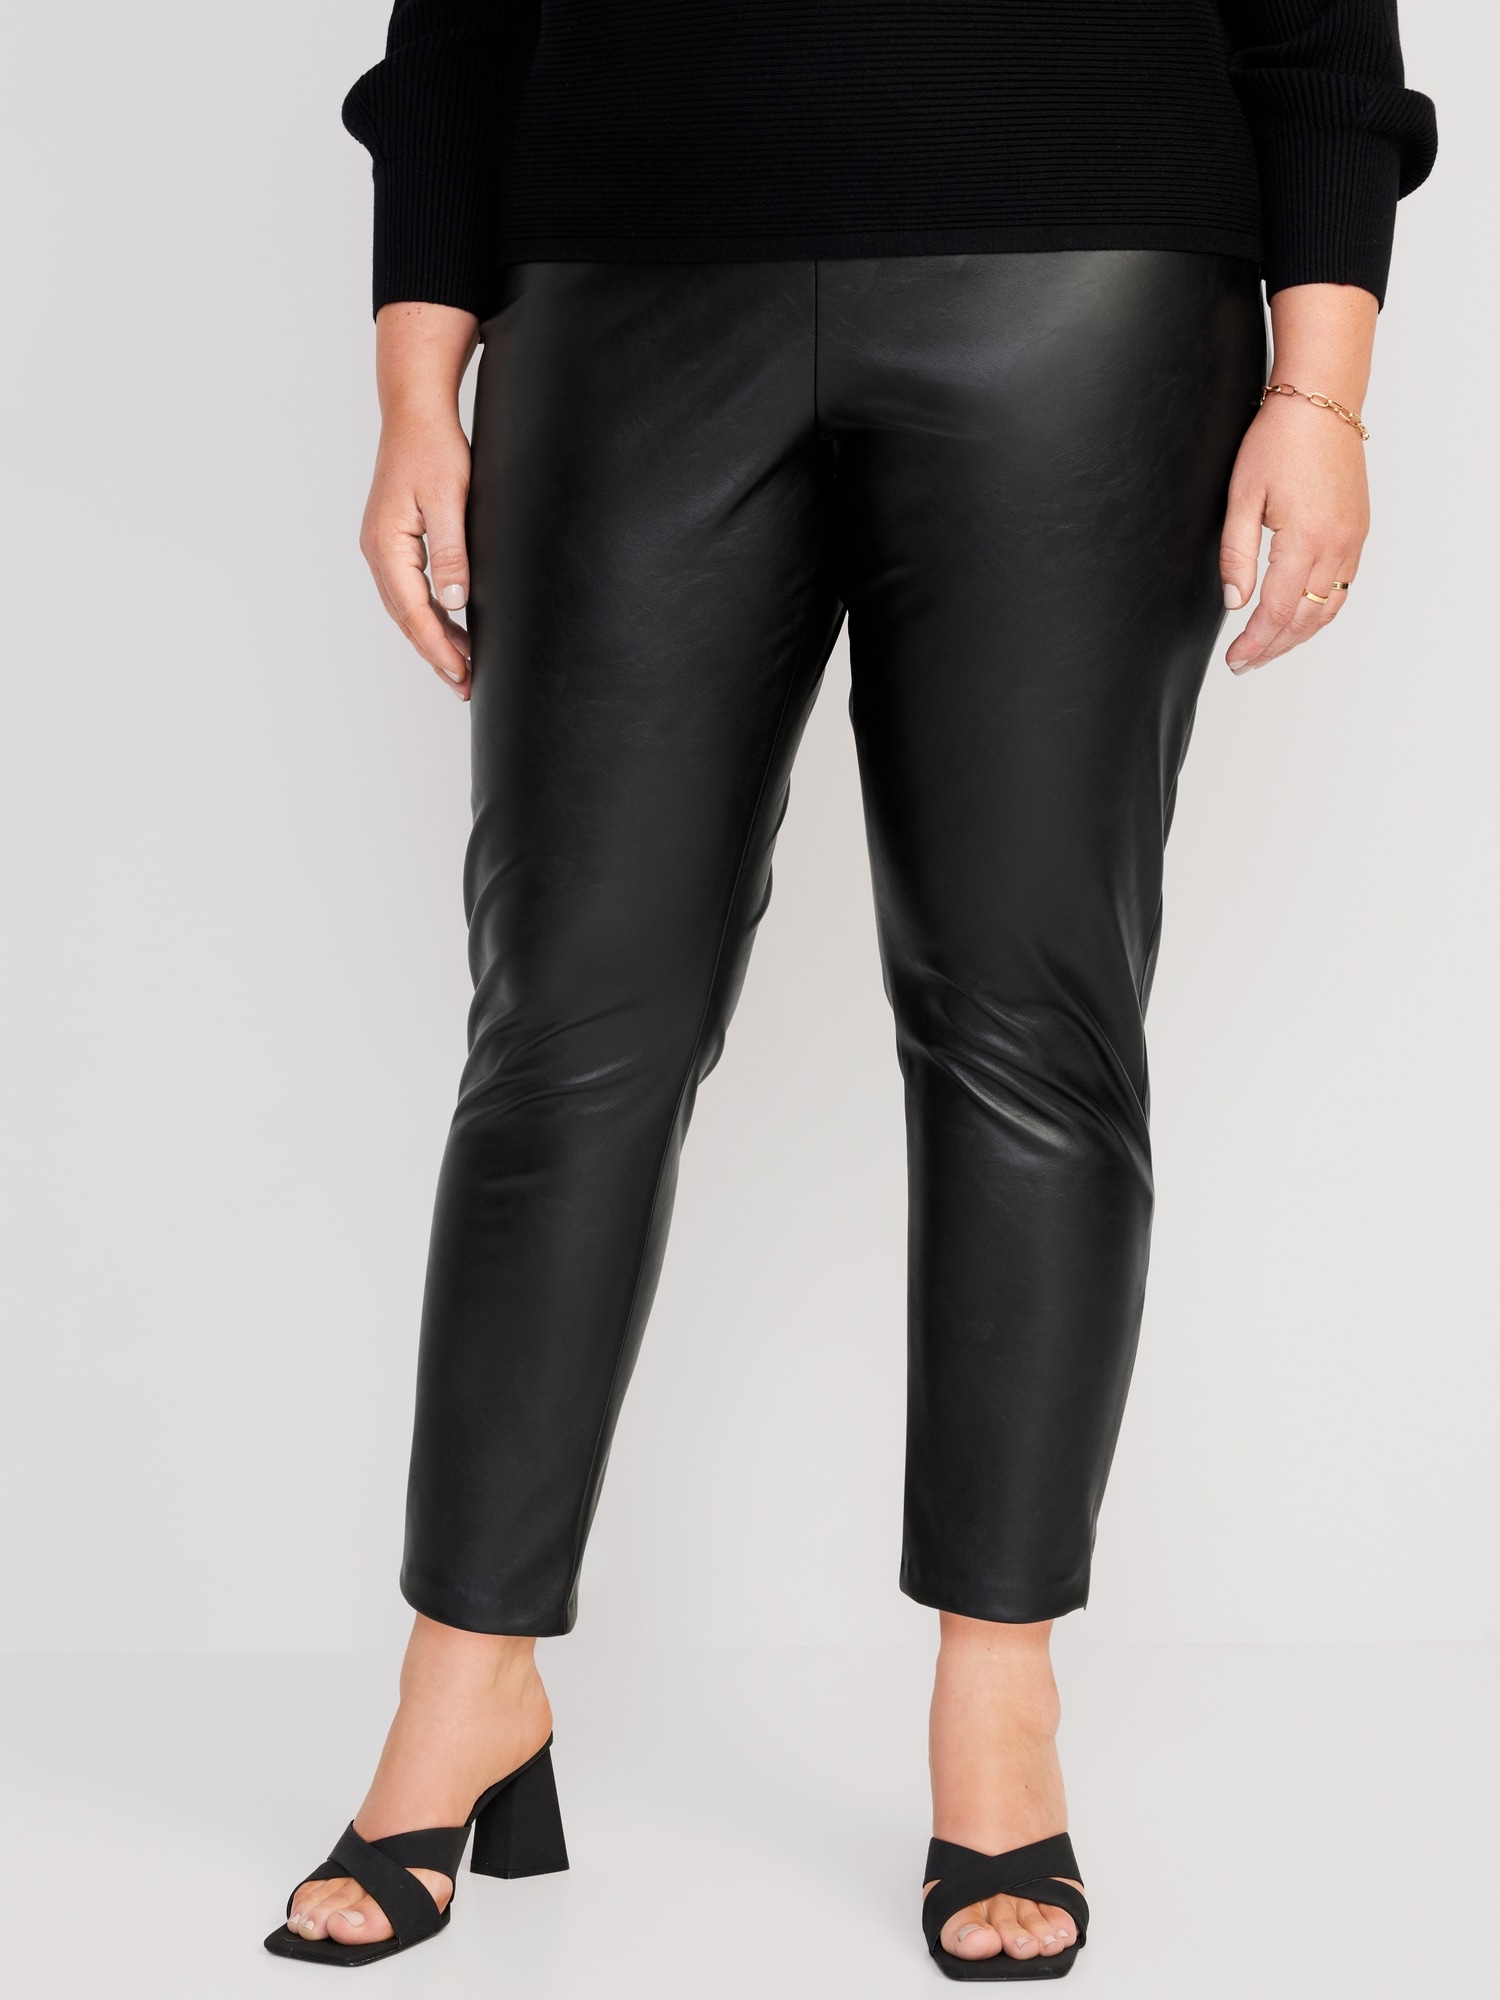 WR.UP® Faux Leather - High Waisted - Petite Length - Black